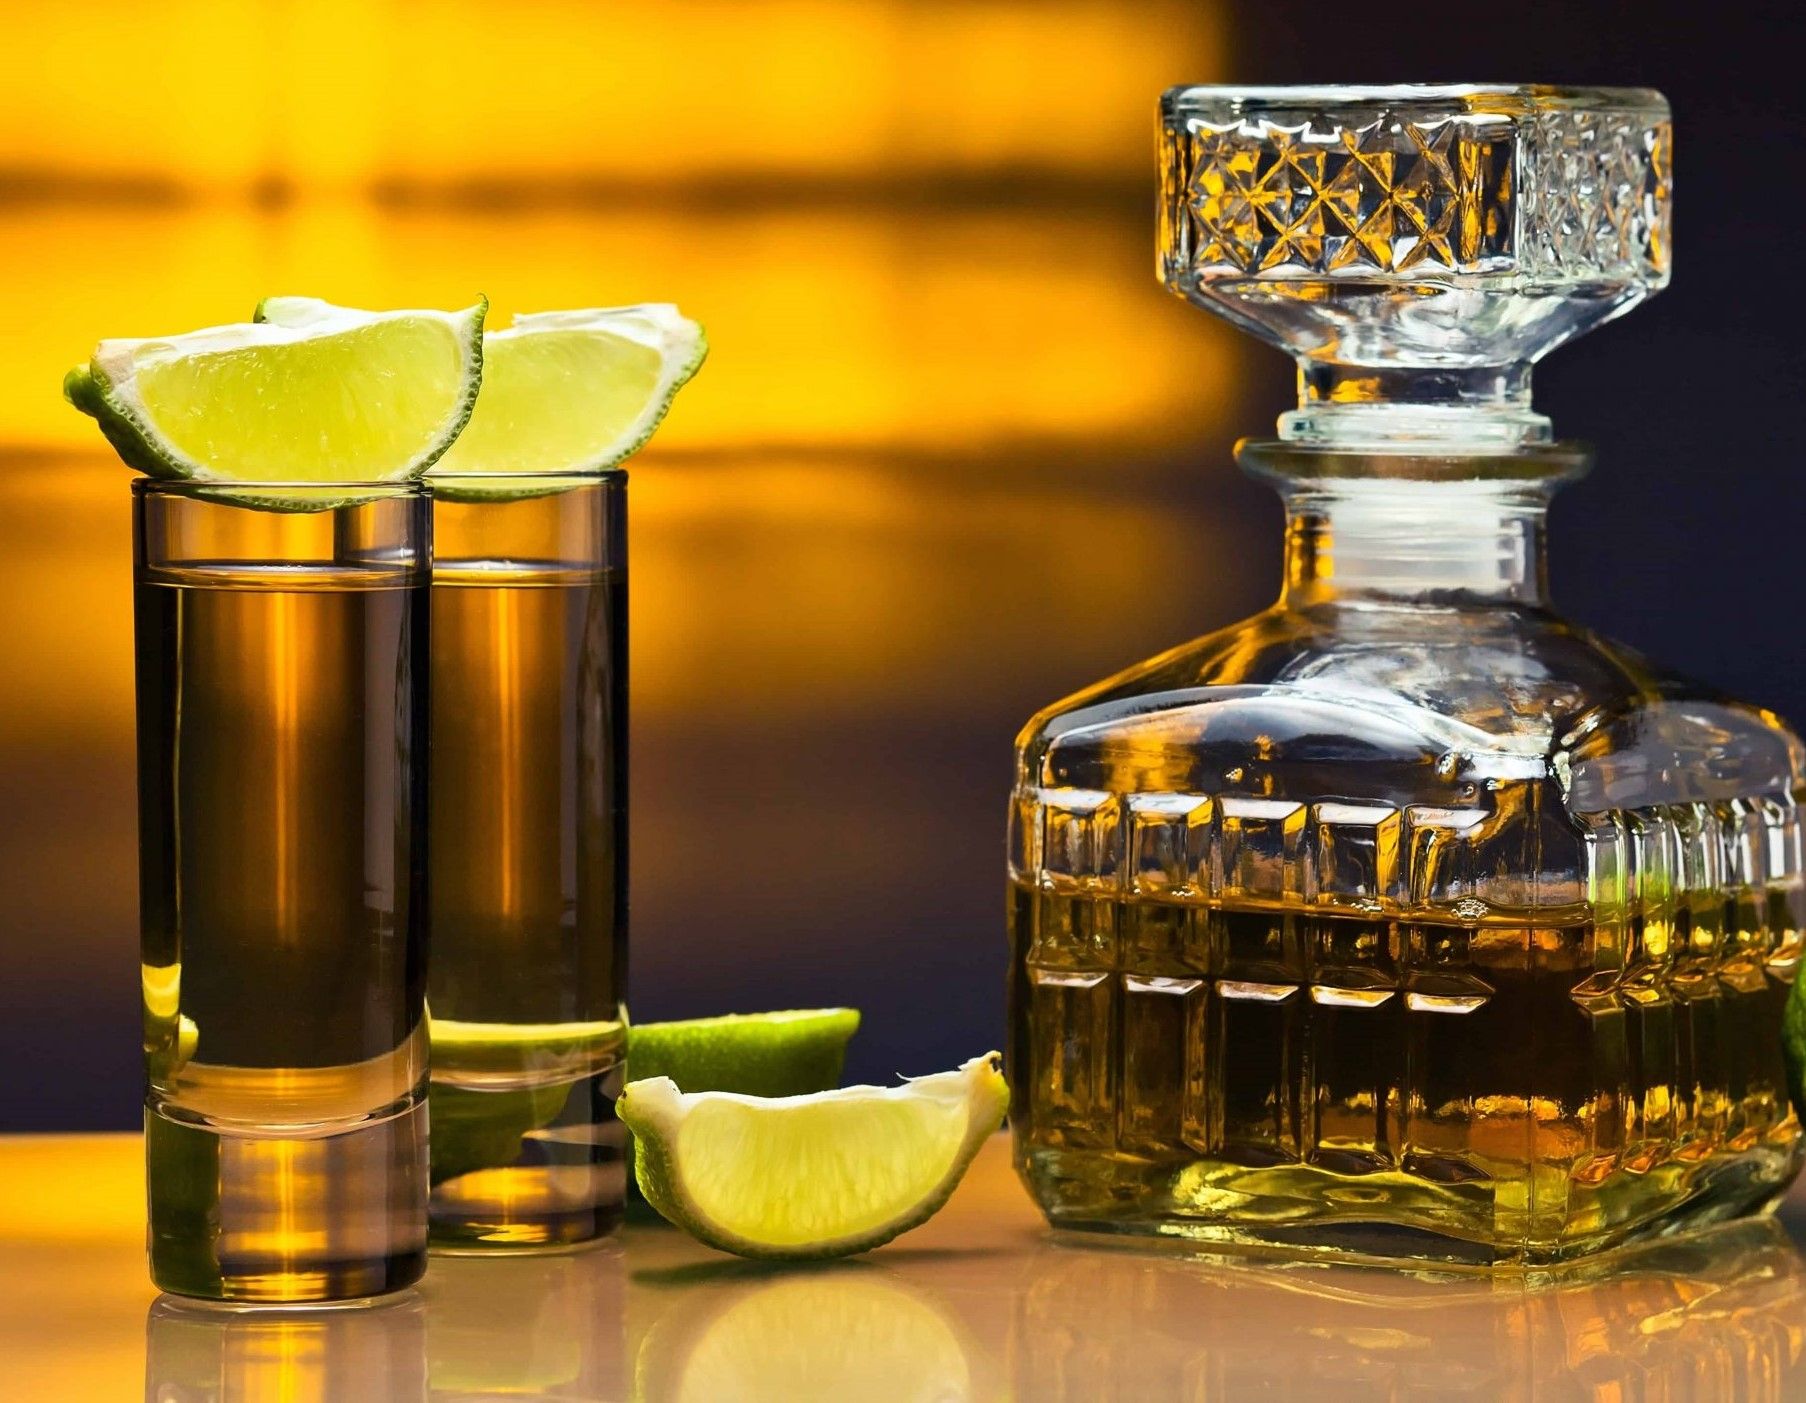 Tequila and mezcal exports grew at an annual rate of 24.3% in 2020, to $ 2.442 billion, Ministry of Agriculture informed.